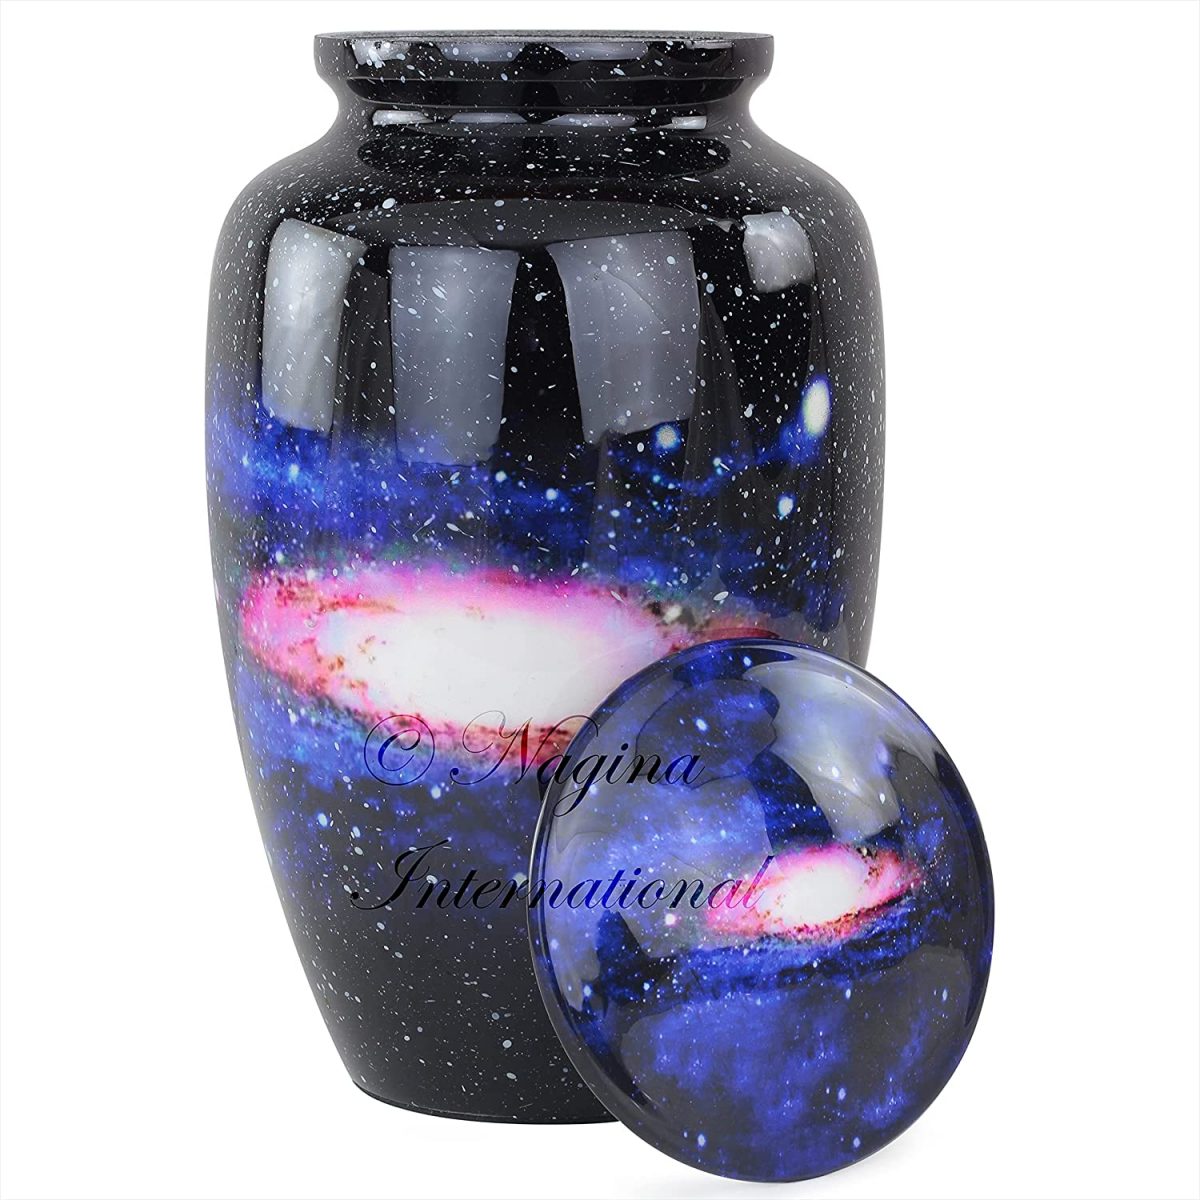 Milky Way Cremation Urns for Human Ashes | for Adult Funeral, Burial, Columbarium or Home | Nagina International